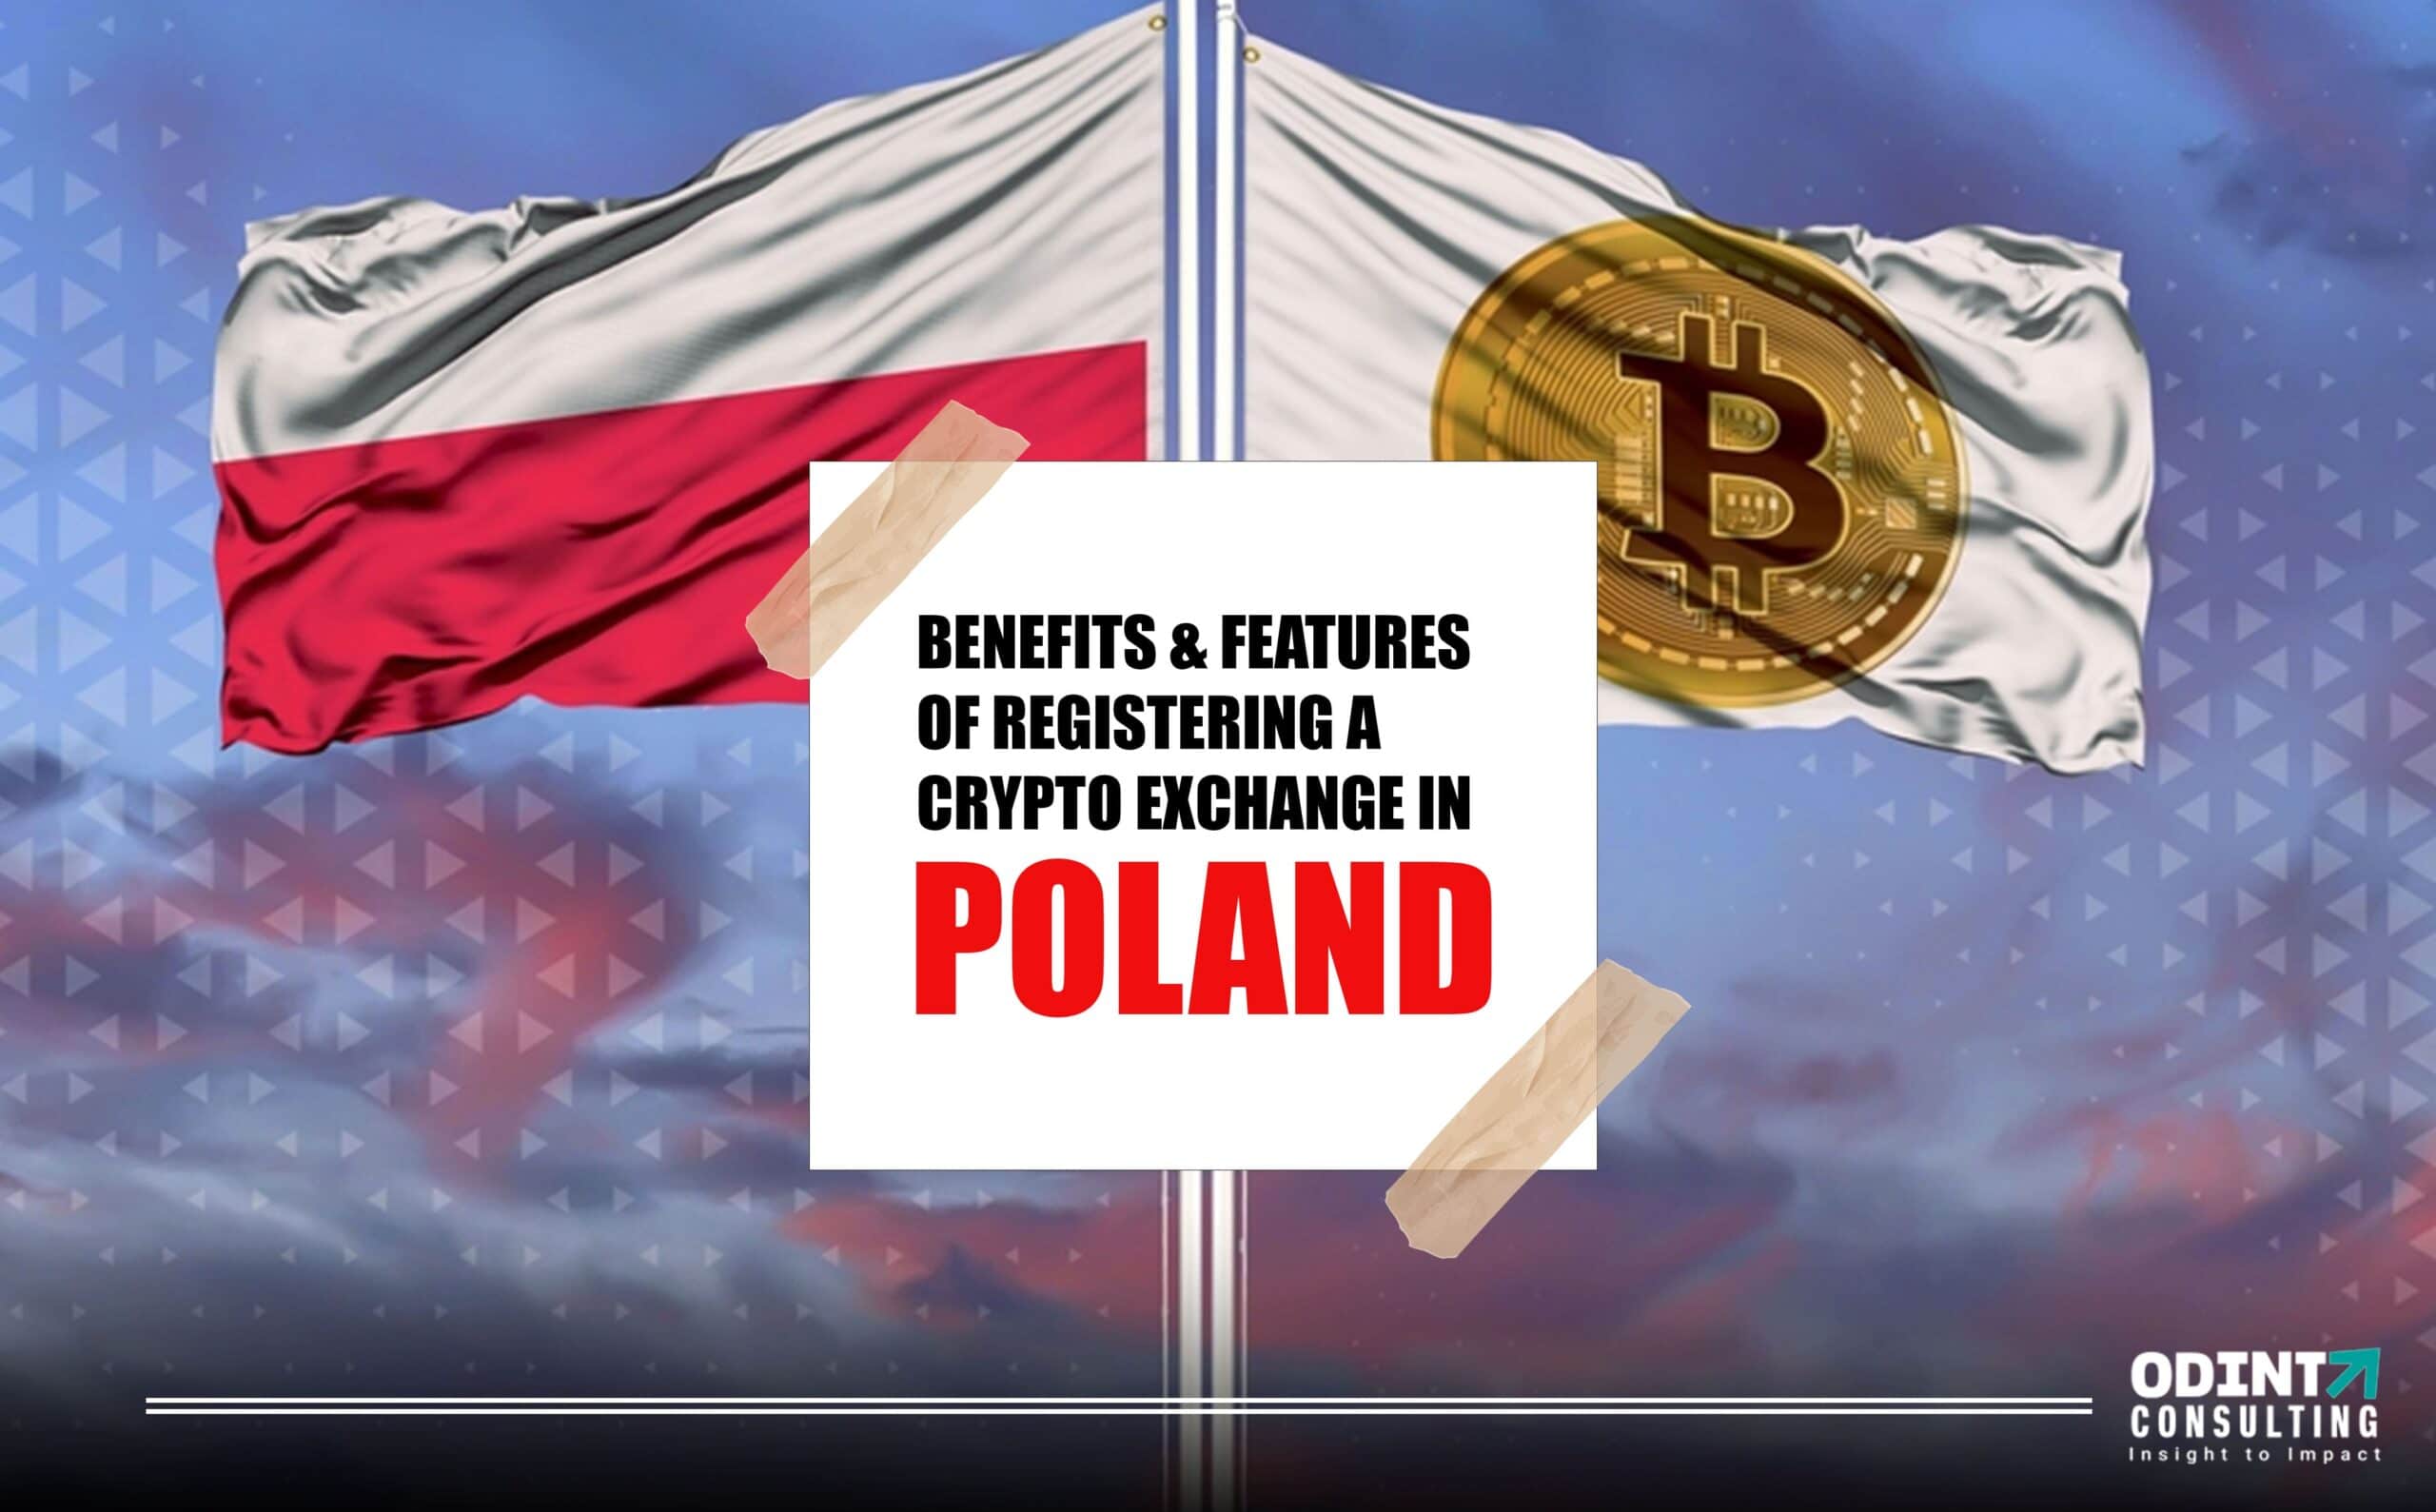 Benefits and Features of Crypto Exchange in Poland 2022